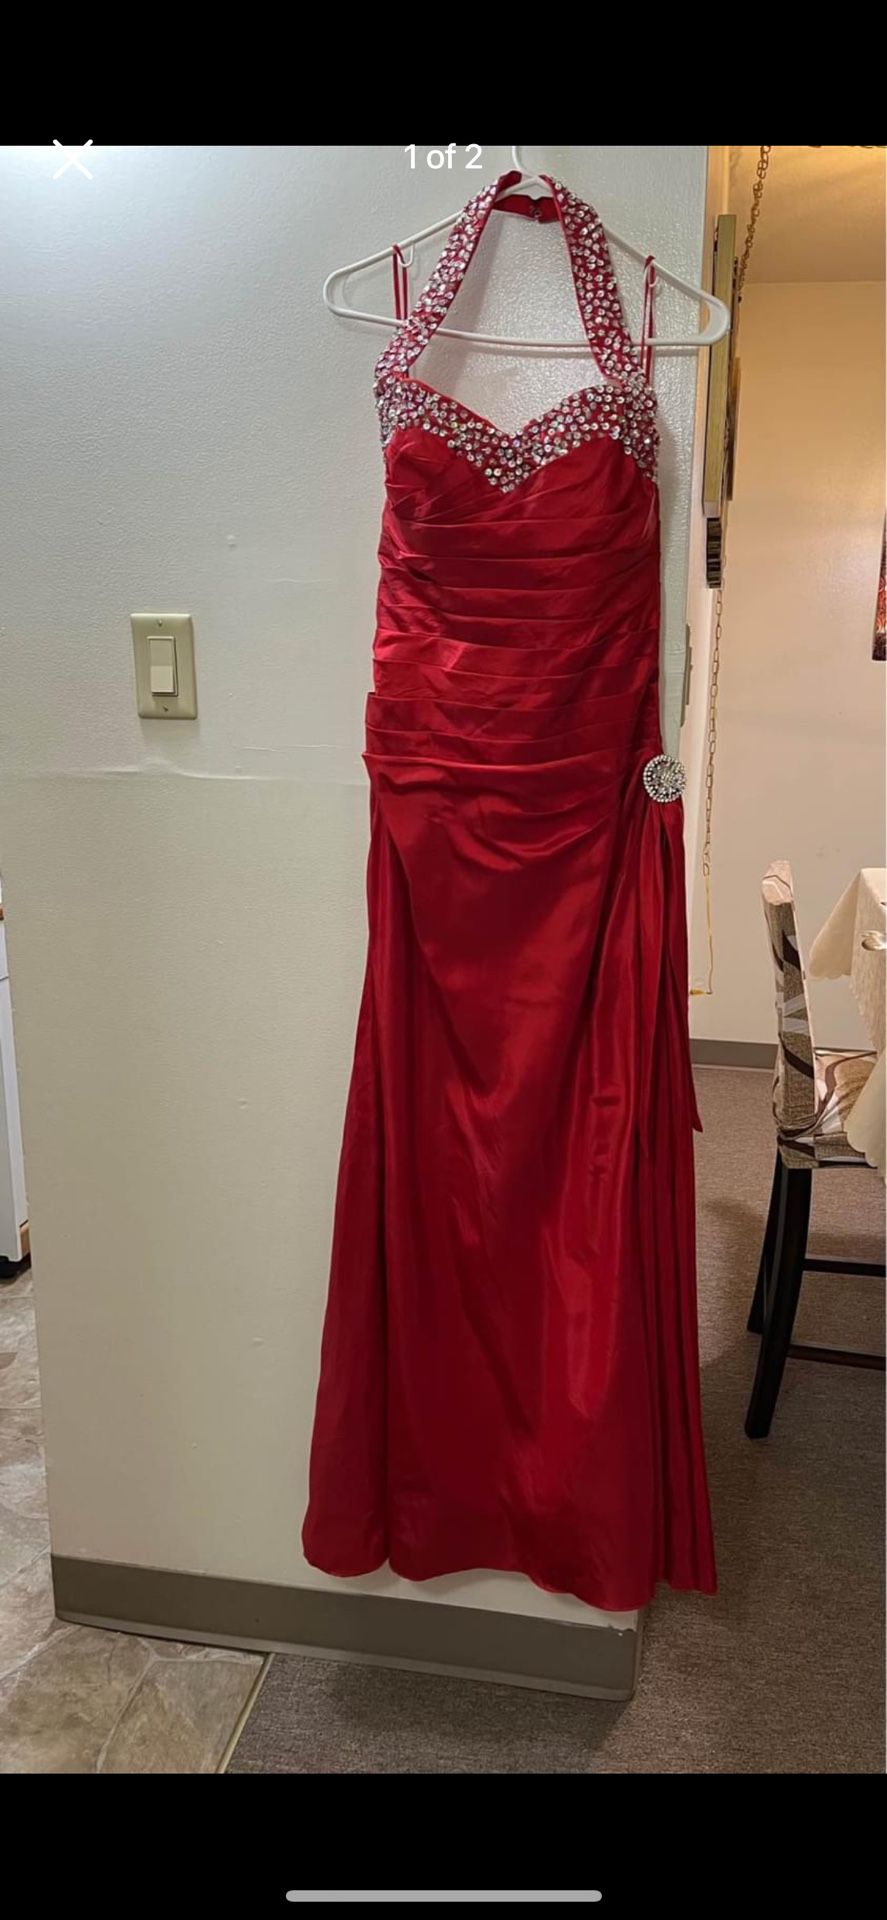 Women’s Beautiful Long Red Dress For A Special Occasion Size 12 New Condition 